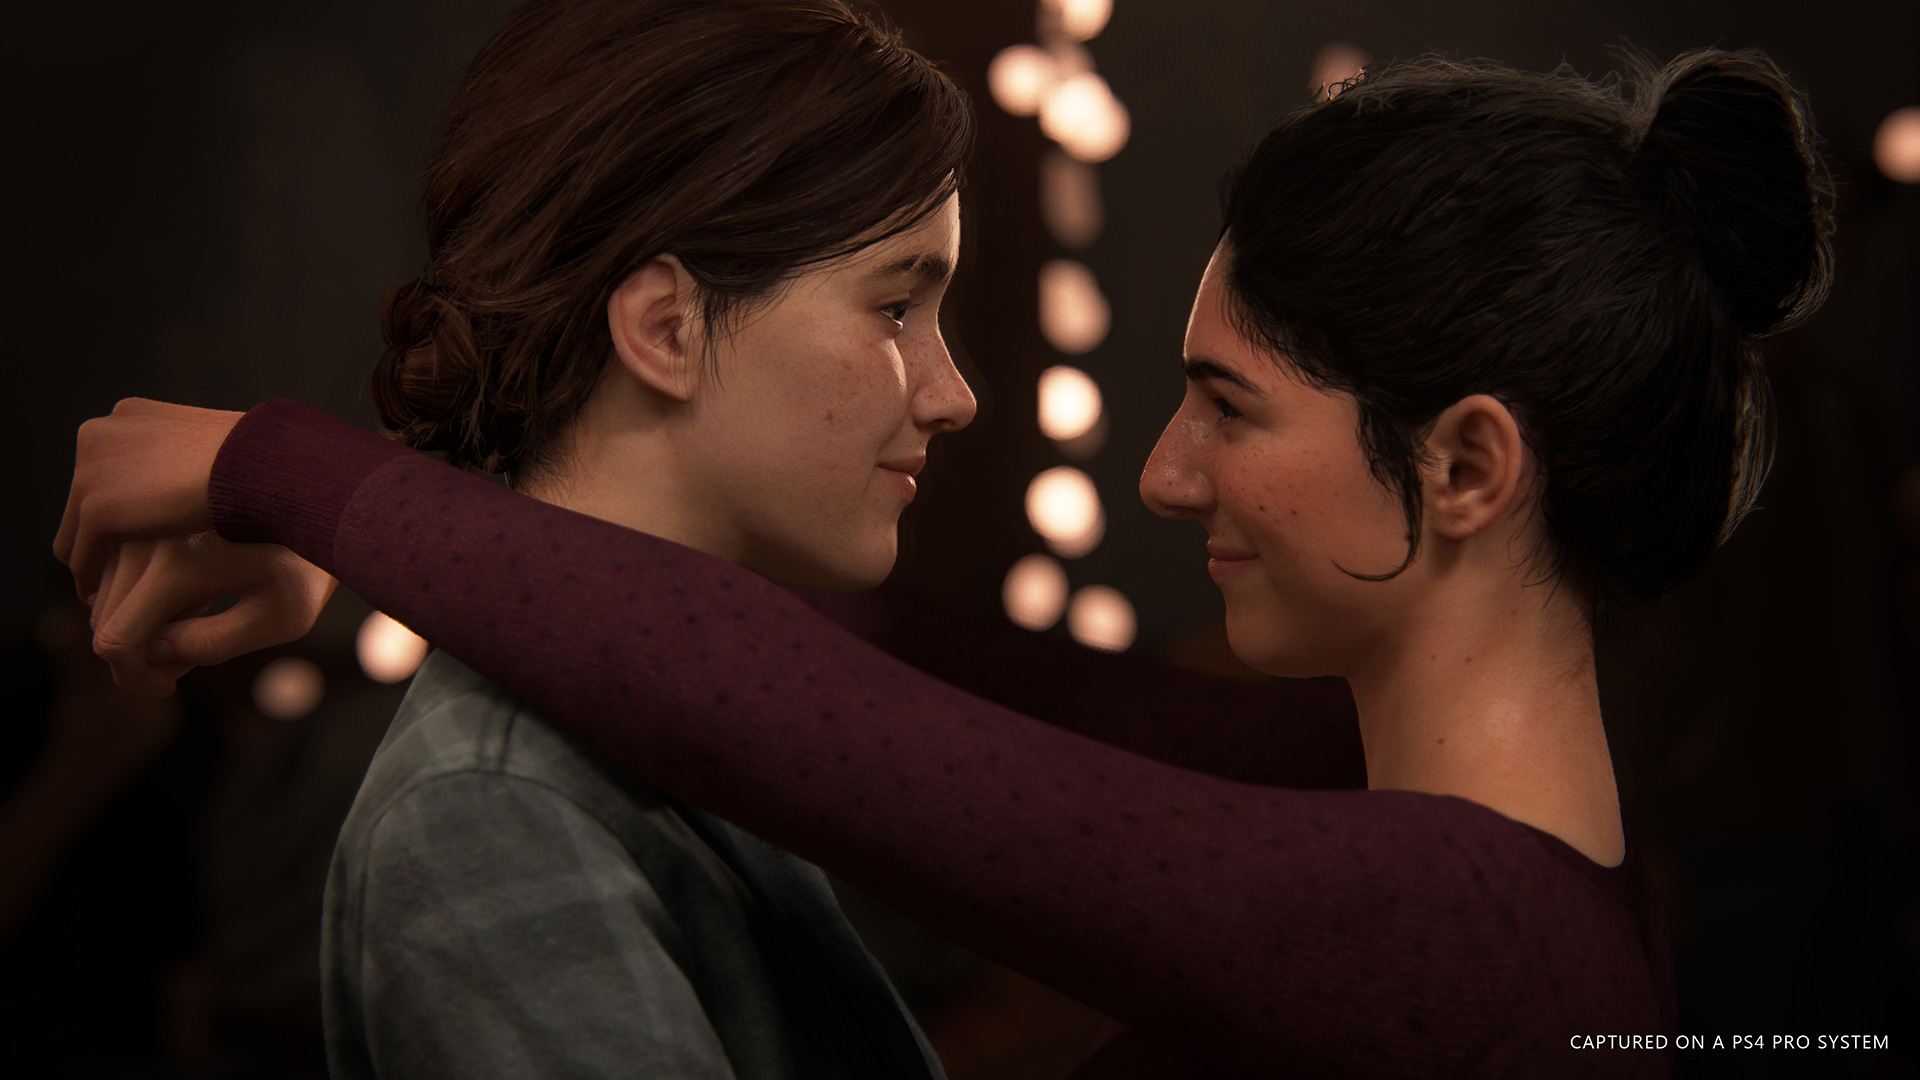 E3 Trailer: 'The Last of Us Part 2' Shows Off Stealth Gameplay